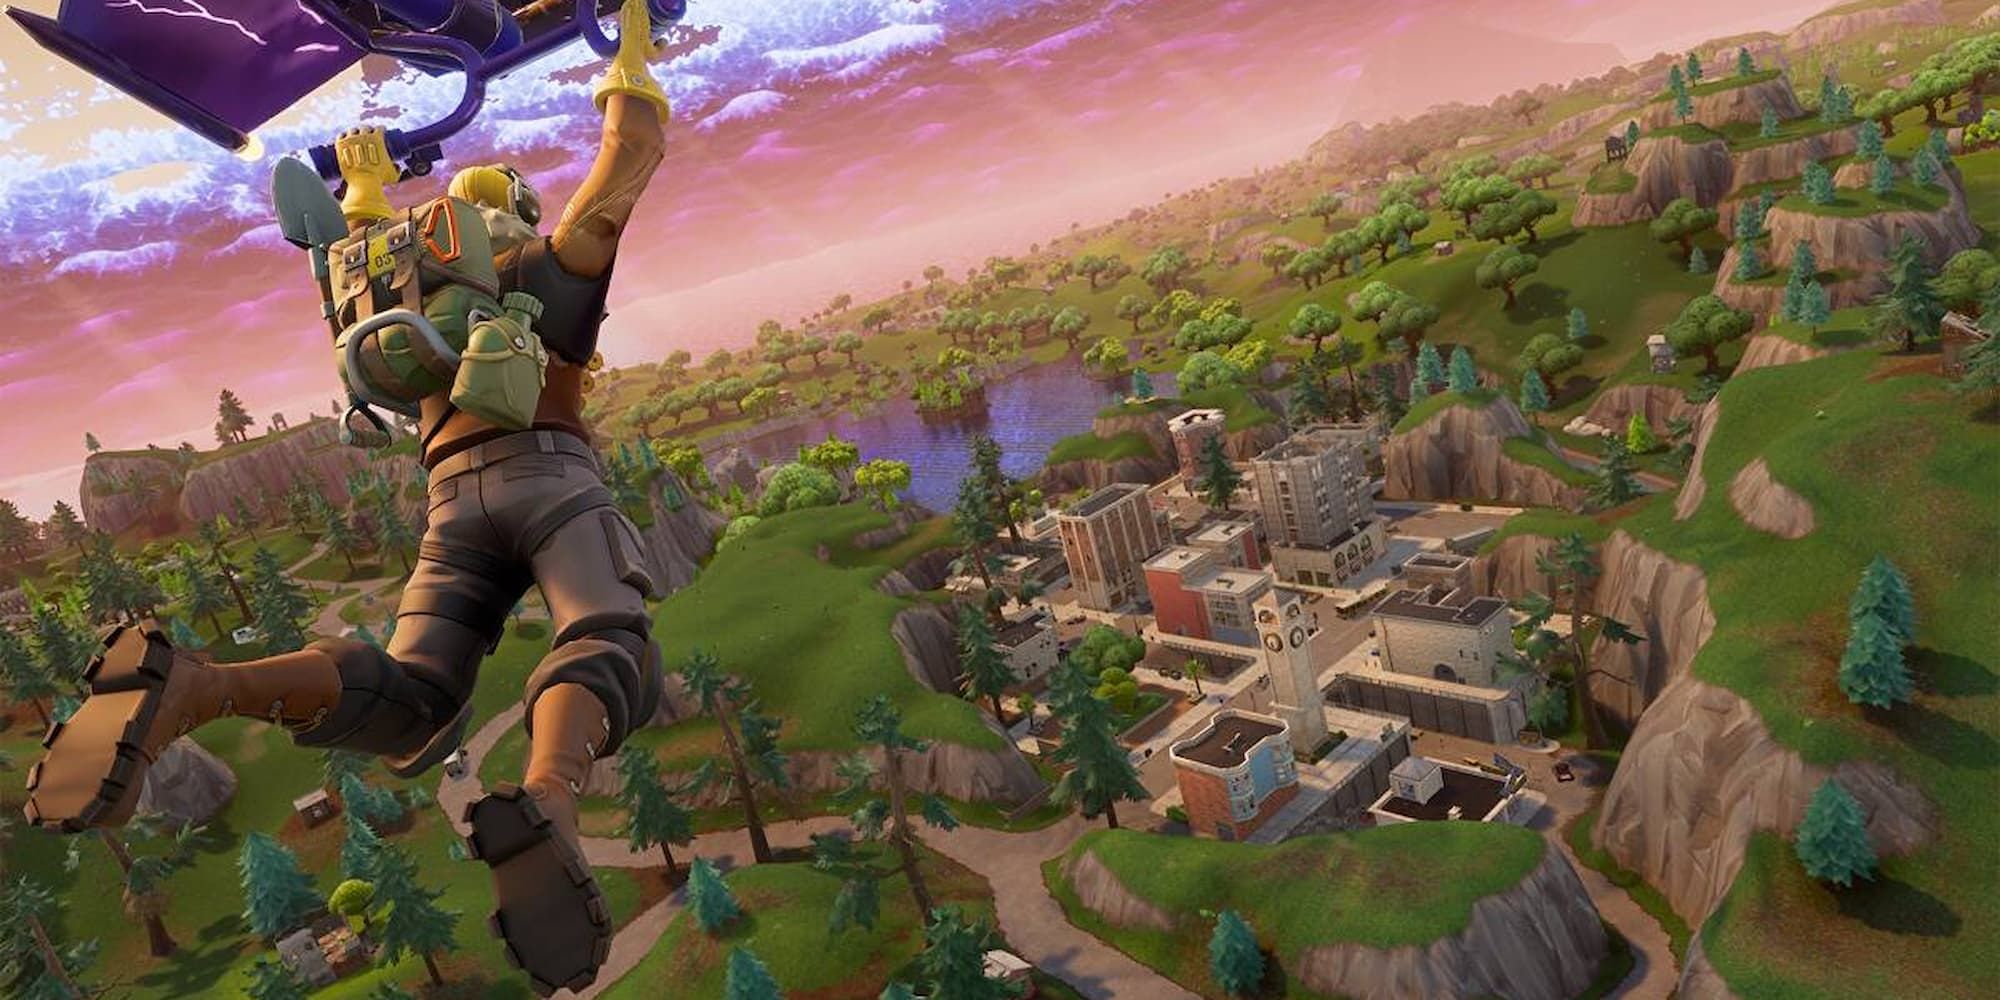 A Fortnite player has deployed their glider in order to safely land at a POI.